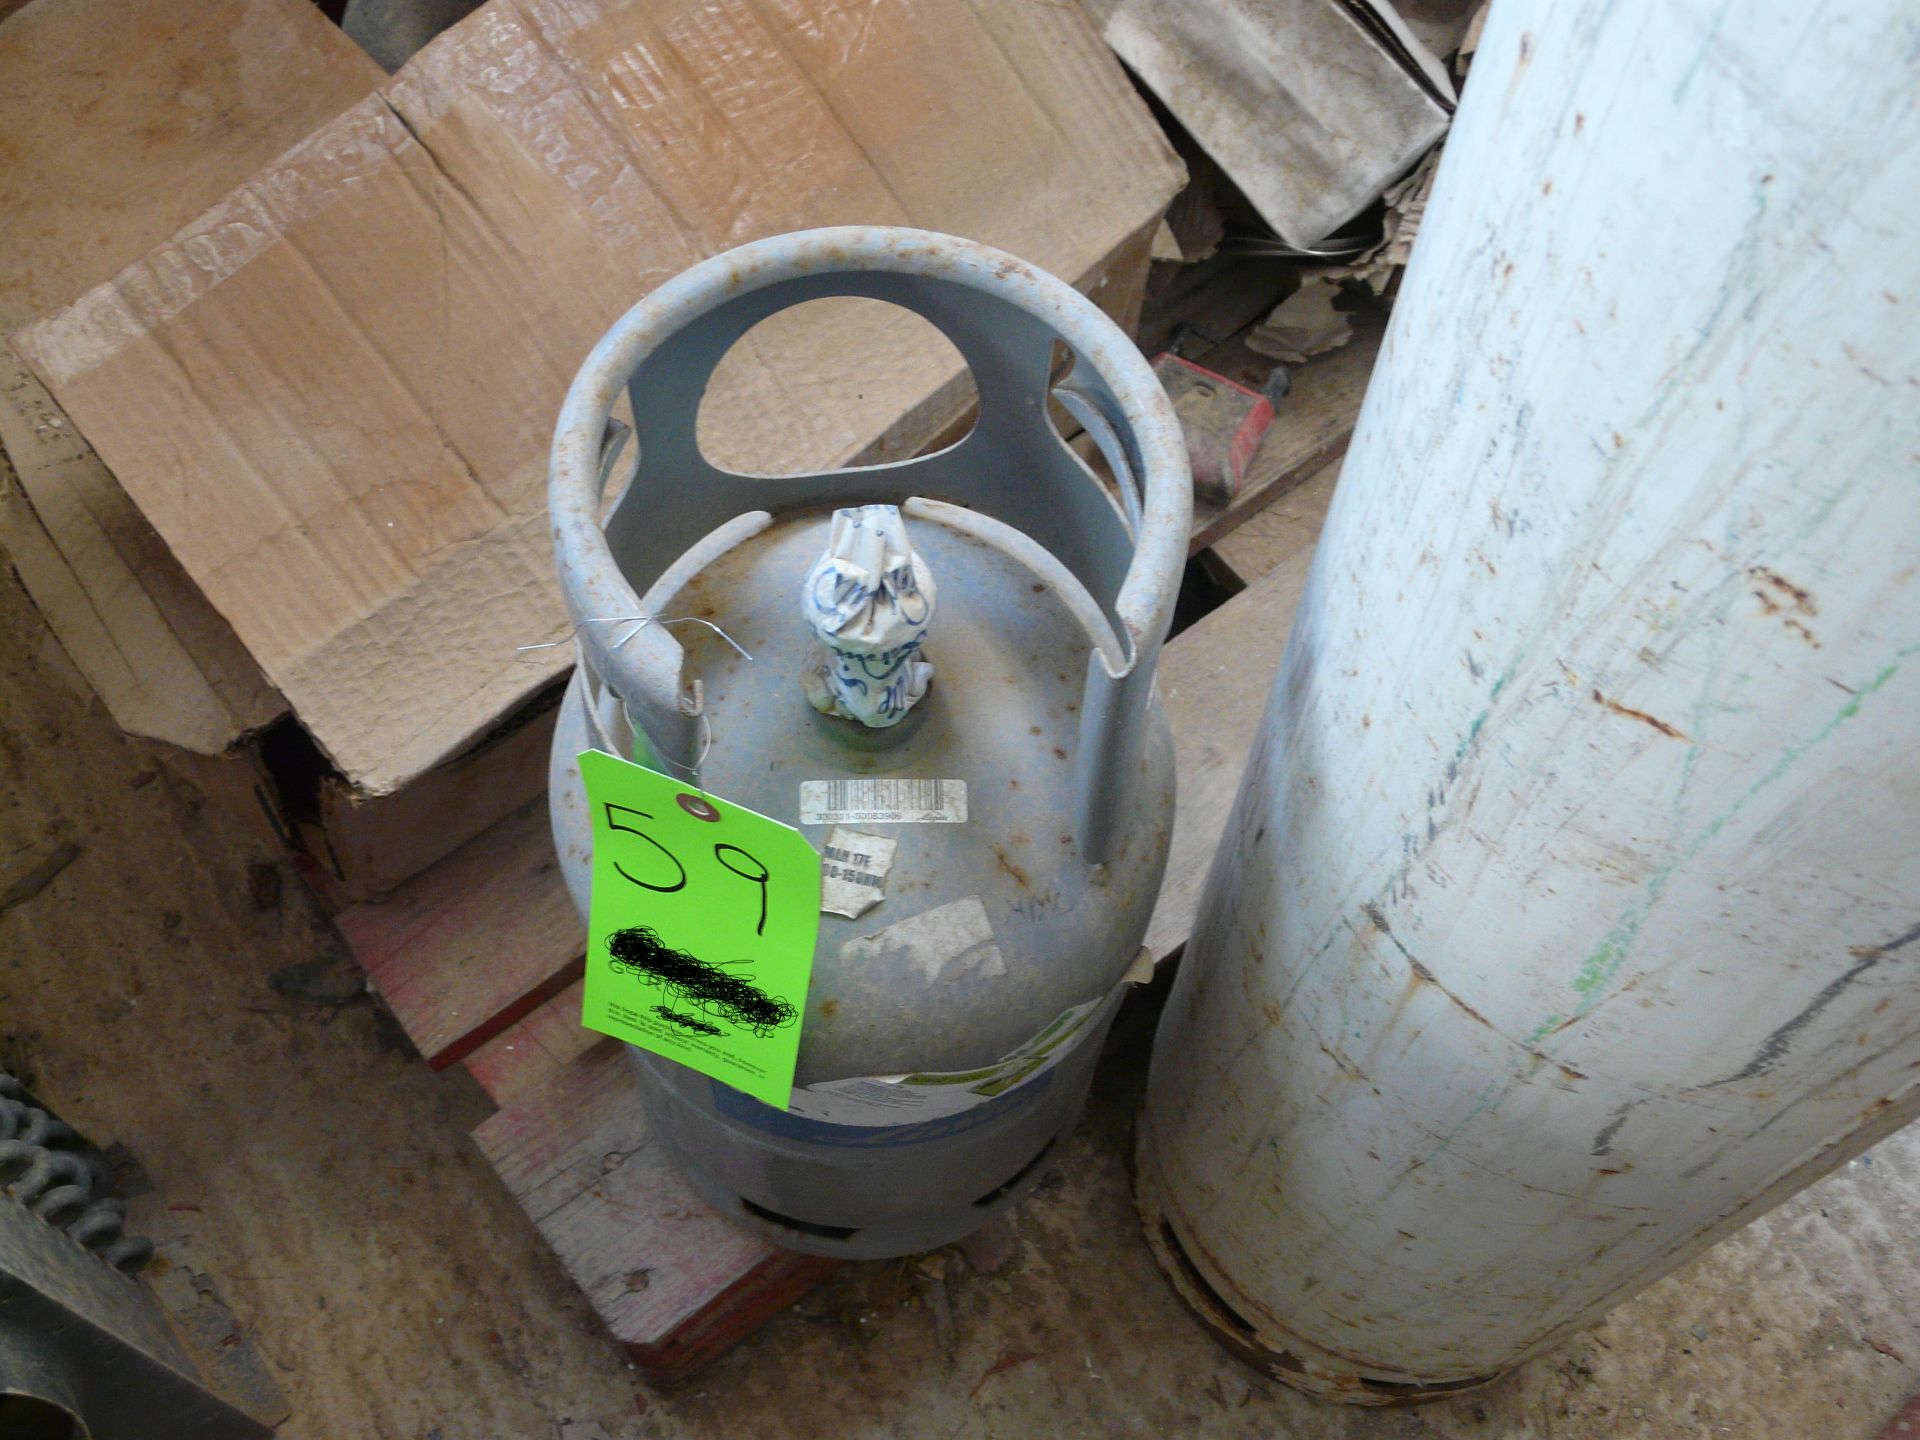 R407C Container 11kg full ,R410 Container 10kg,2 Large Containers empty for Freon Liquid .